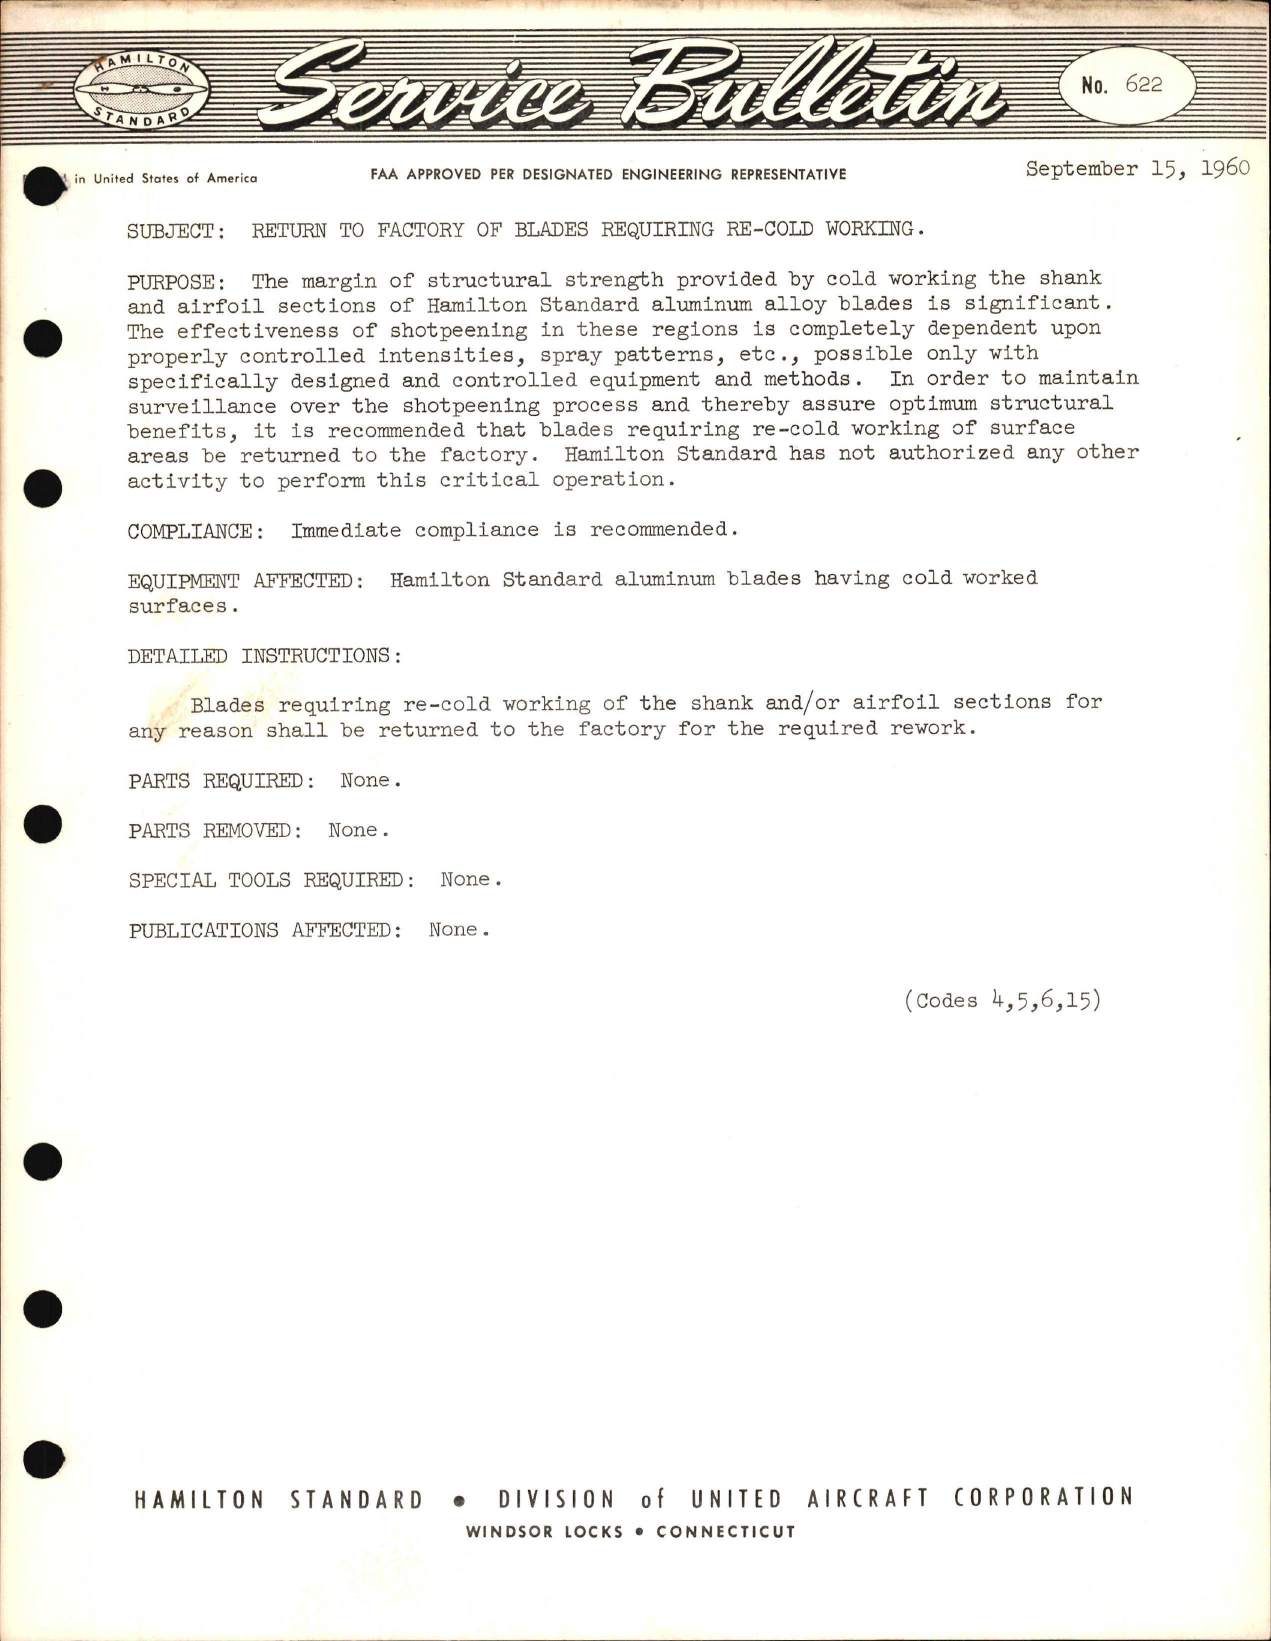 Sample page 1 from AirCorps Library document: Return to Factory of Blades Requiring Re-Cold Working